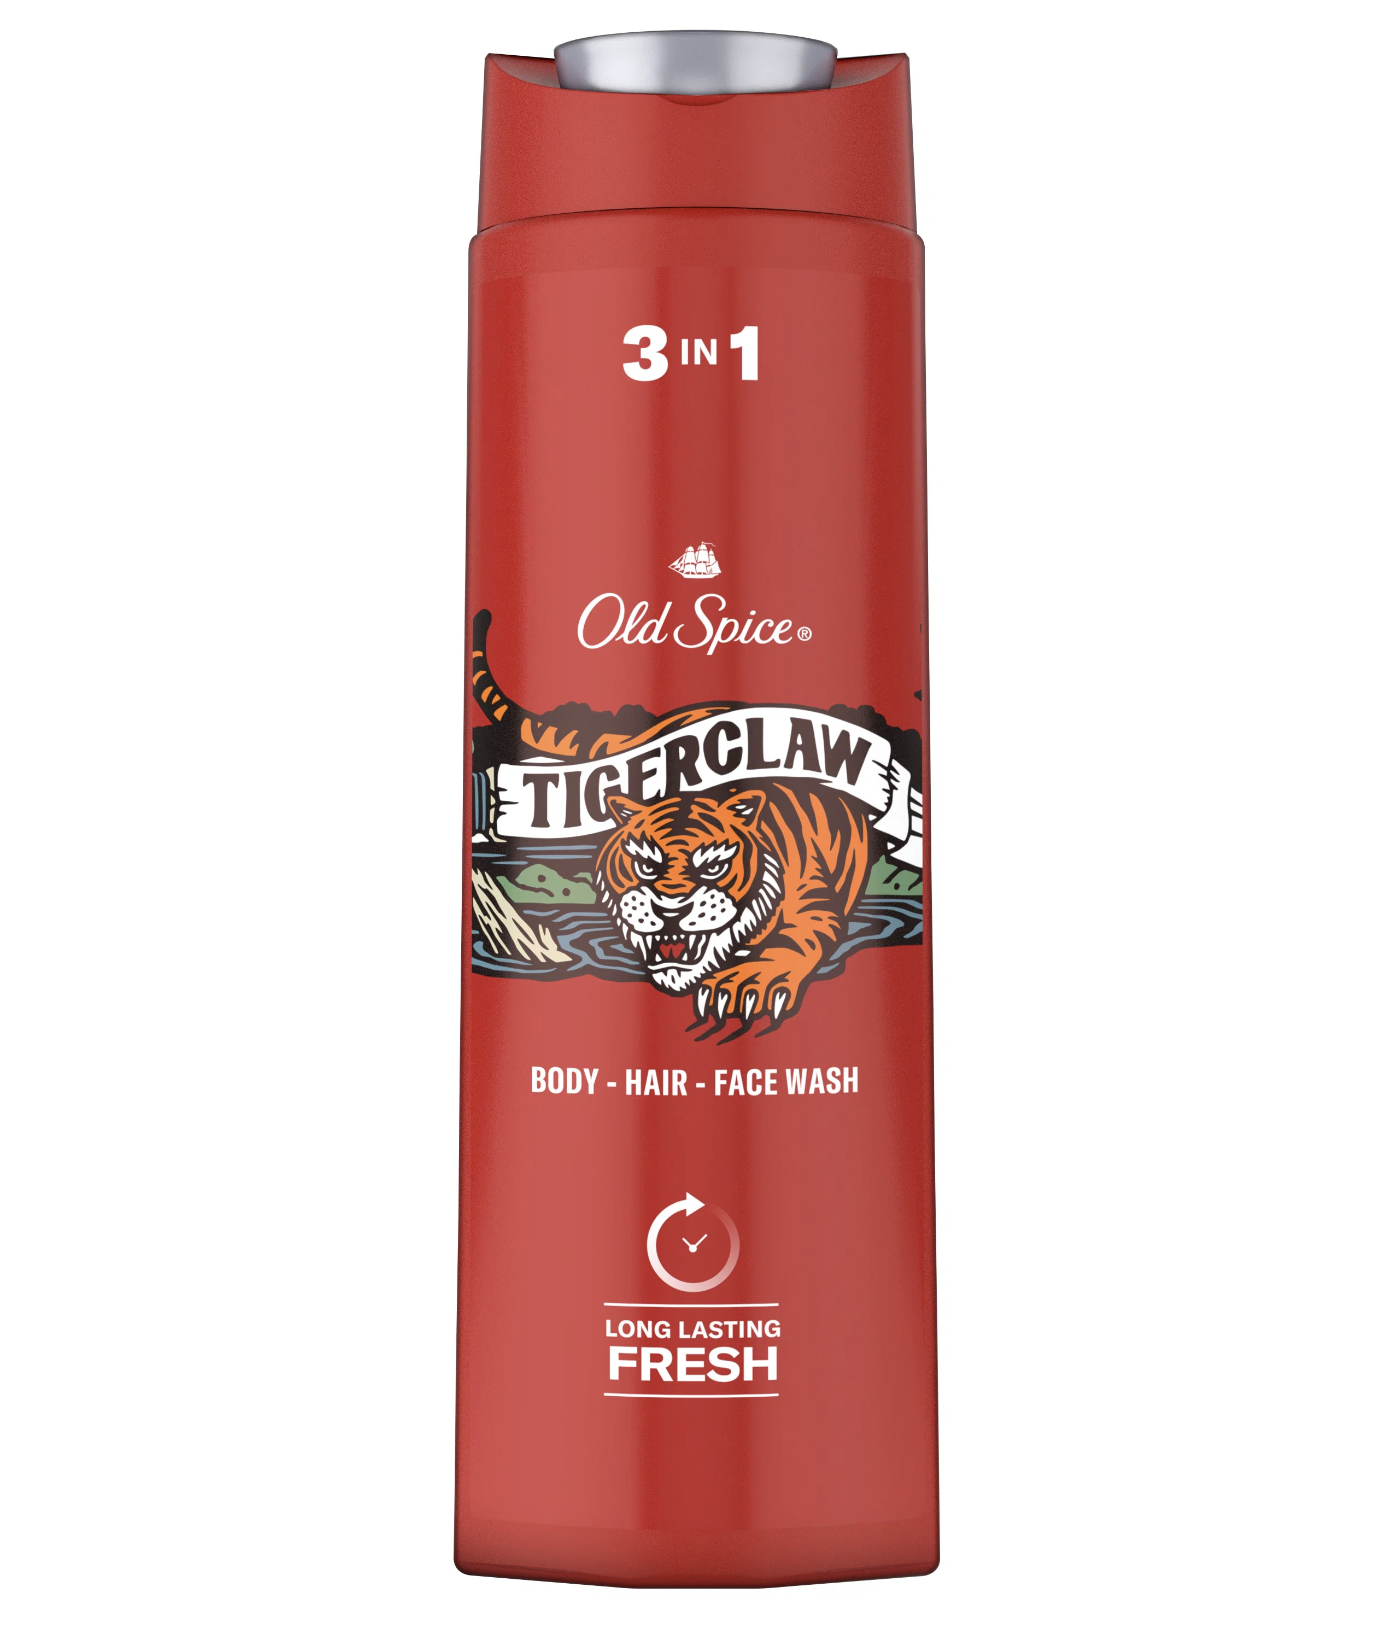    / Old Spice TigerClaw -    31, 400 